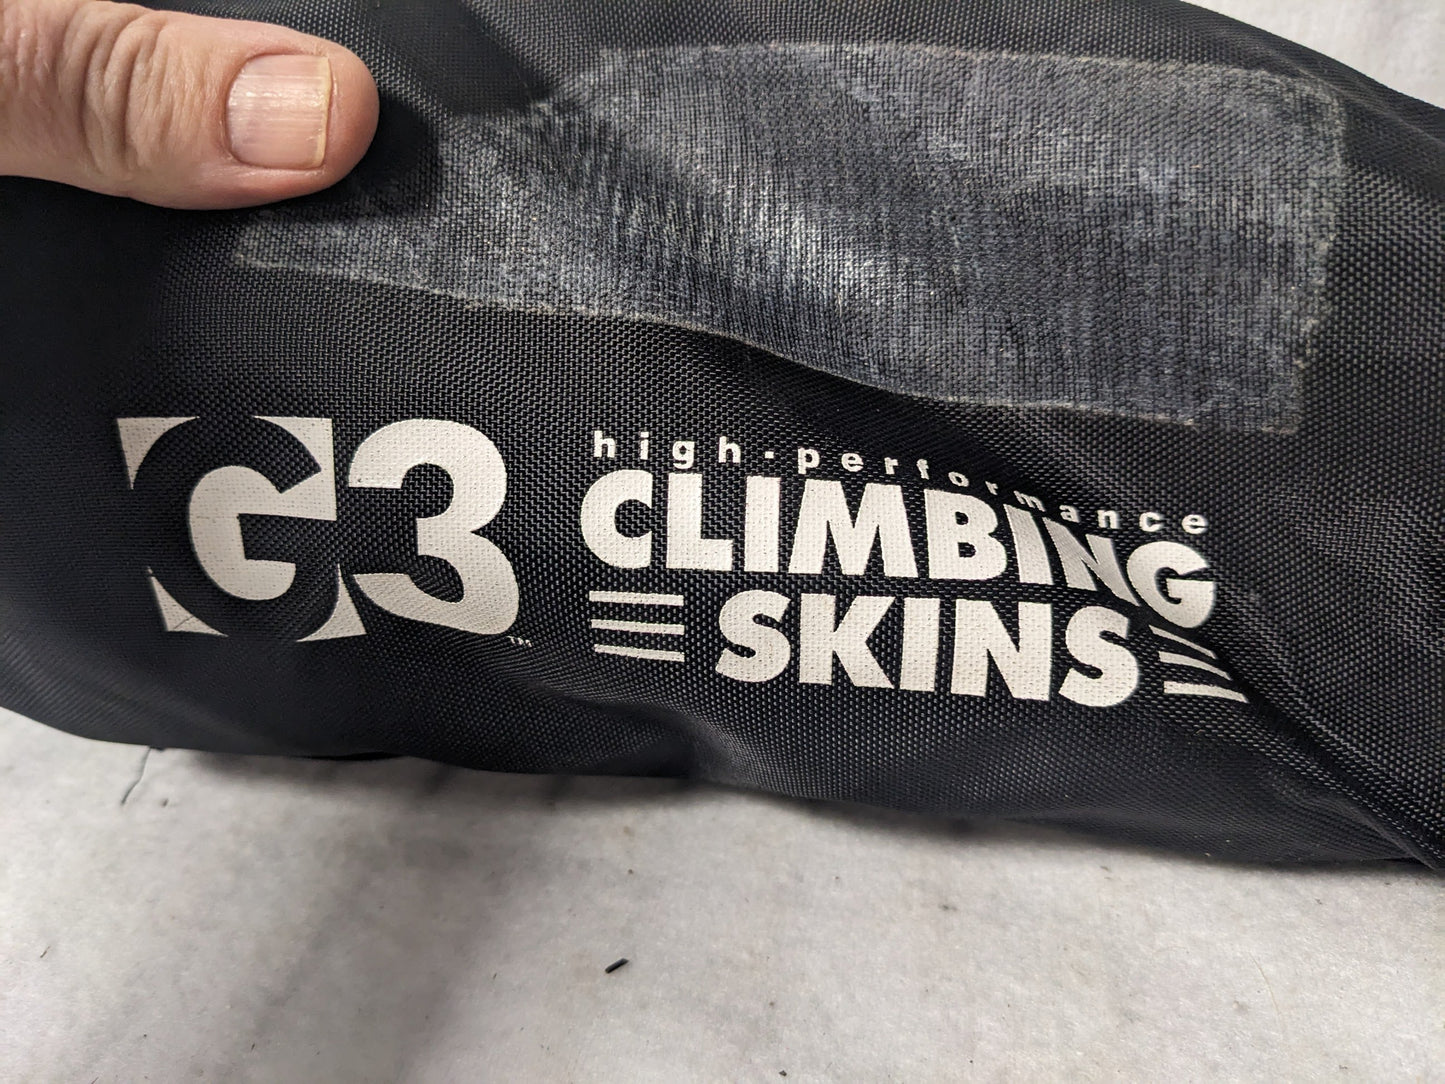 G3 XC Climbing Skins Size 64 In Color Red Condition Used